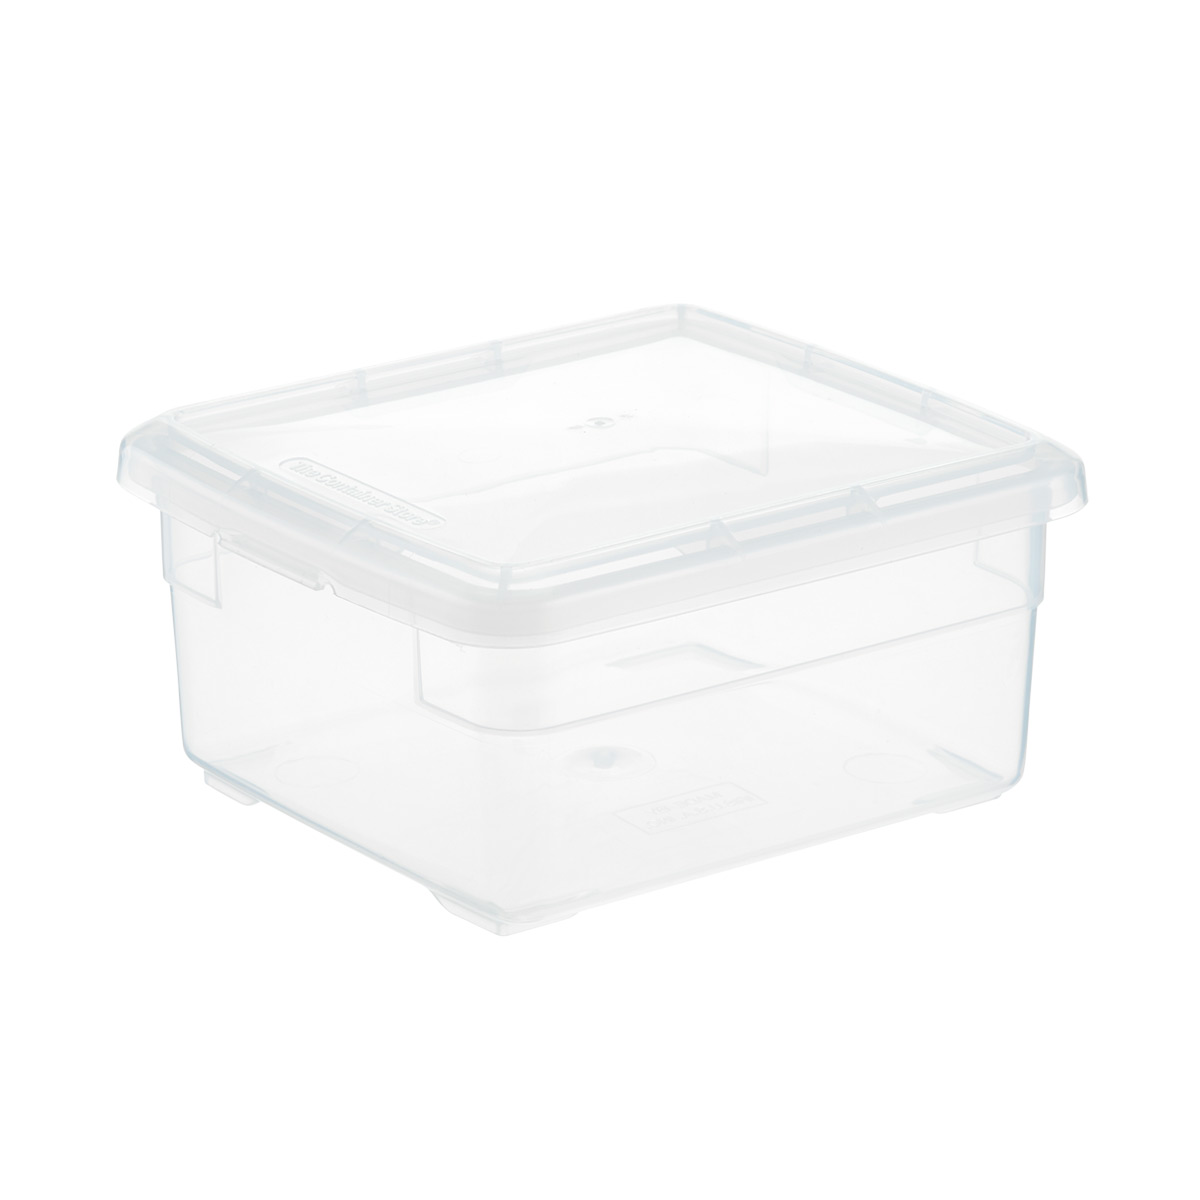 Our Clear Storage Boxes The Container, 10 Inch Storage Container With Lid